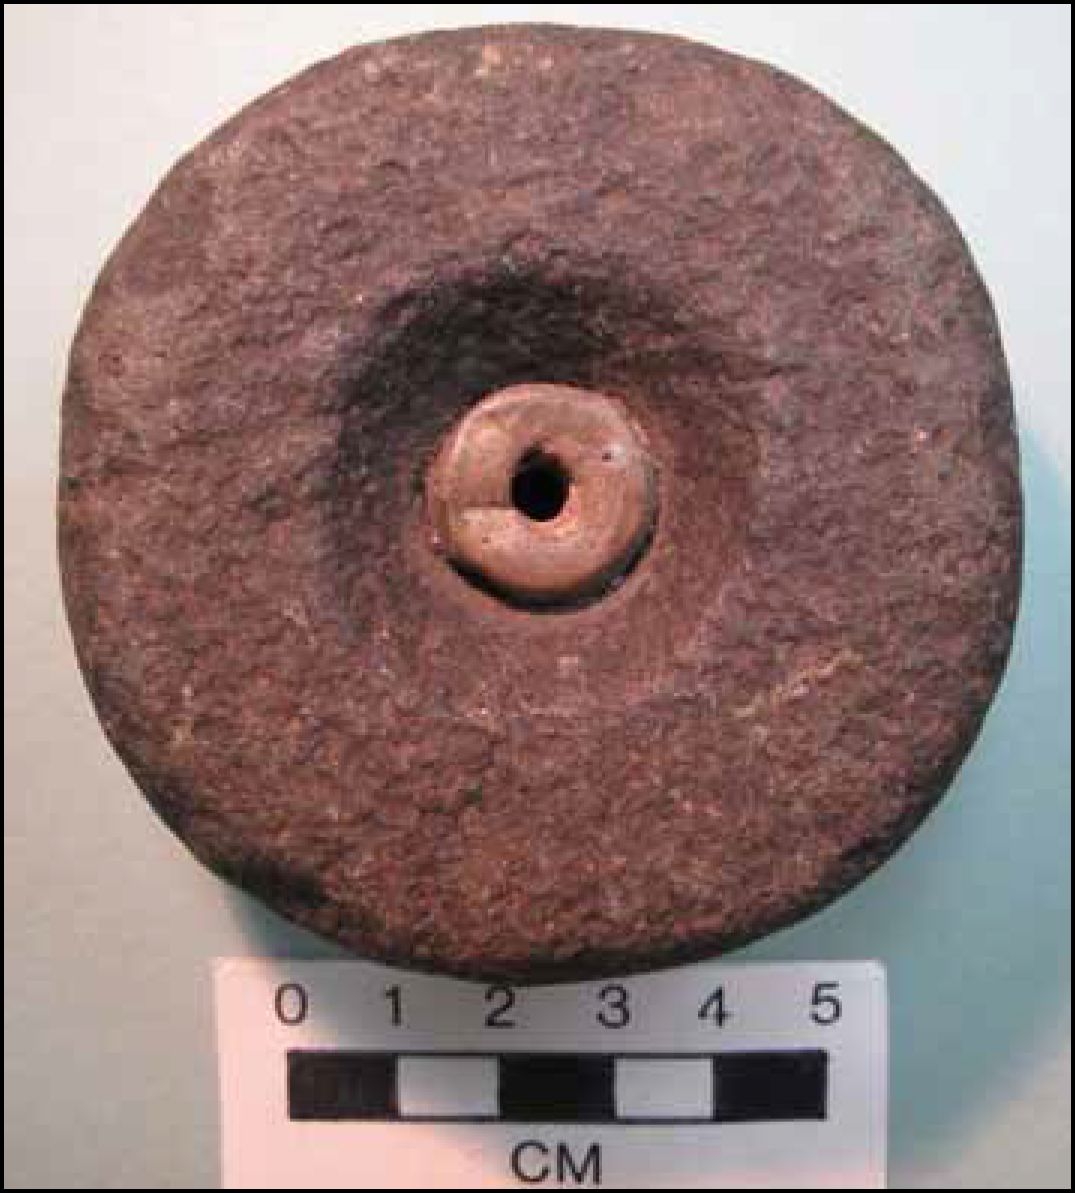 Disc-Shaped Stones